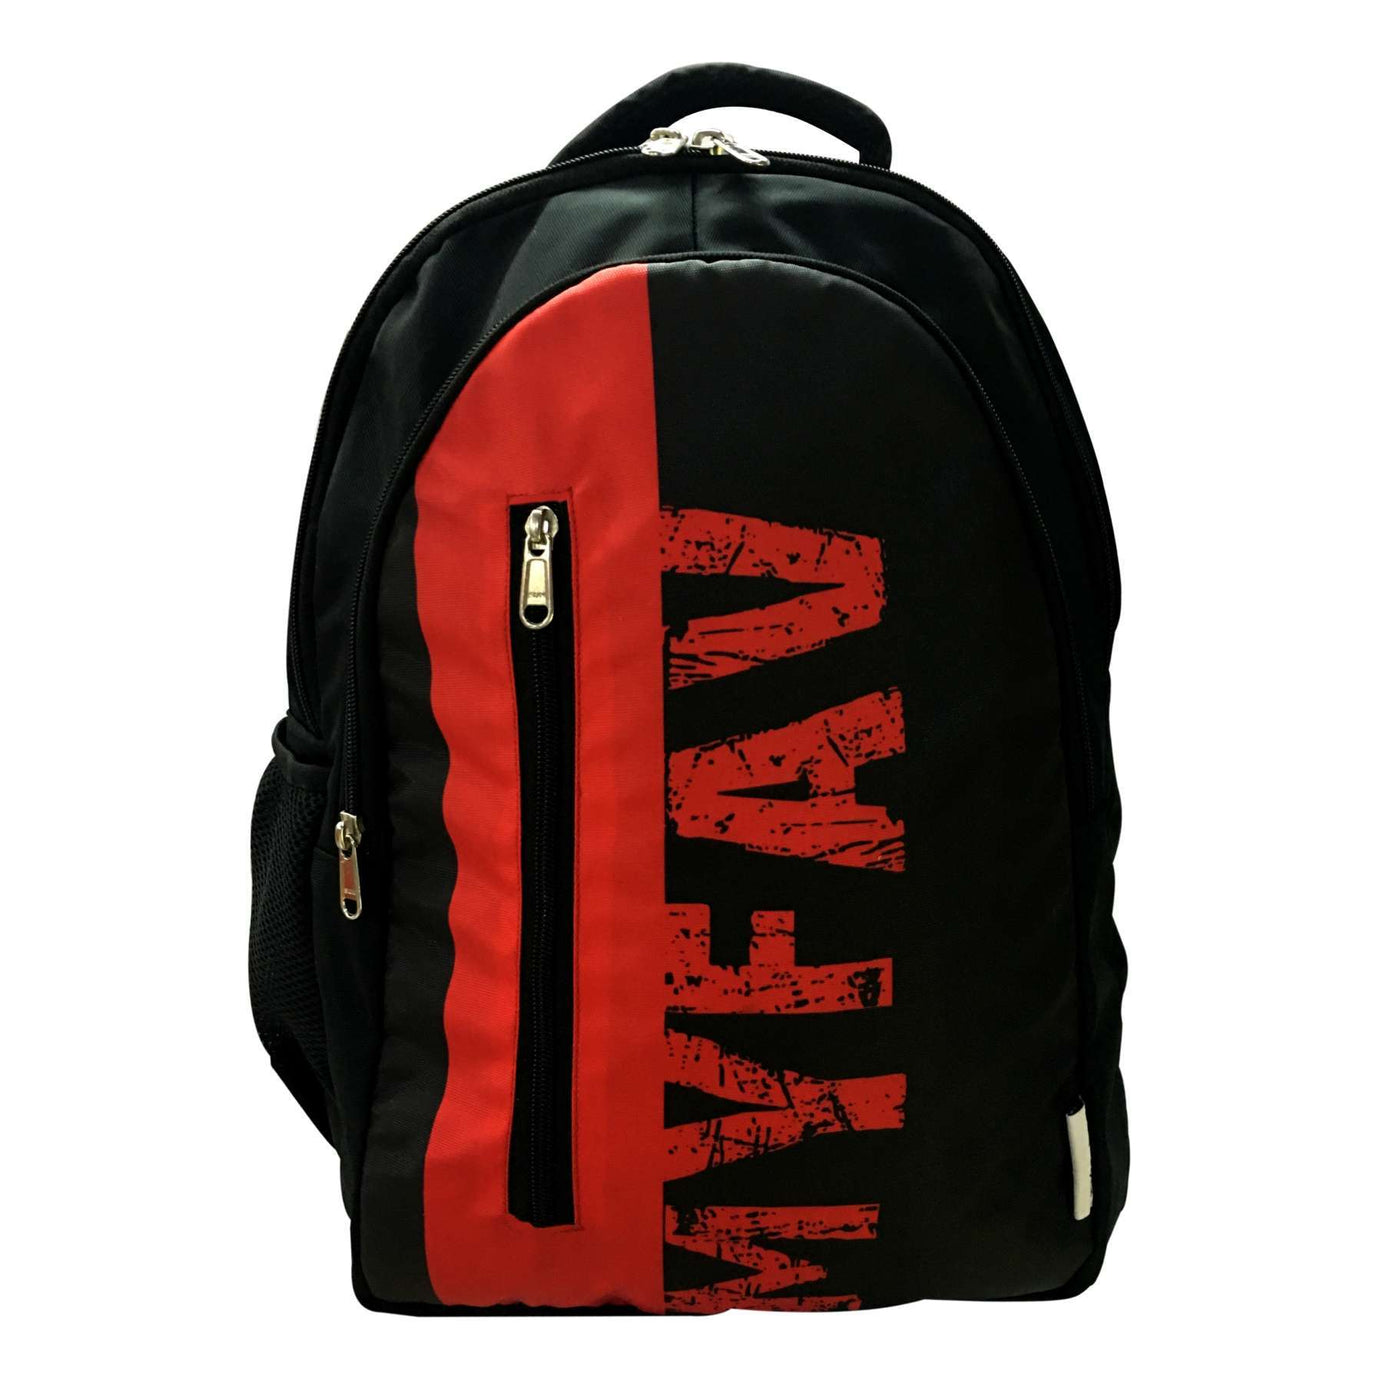 Red Black Laptop Backpack for Office / School / Travel